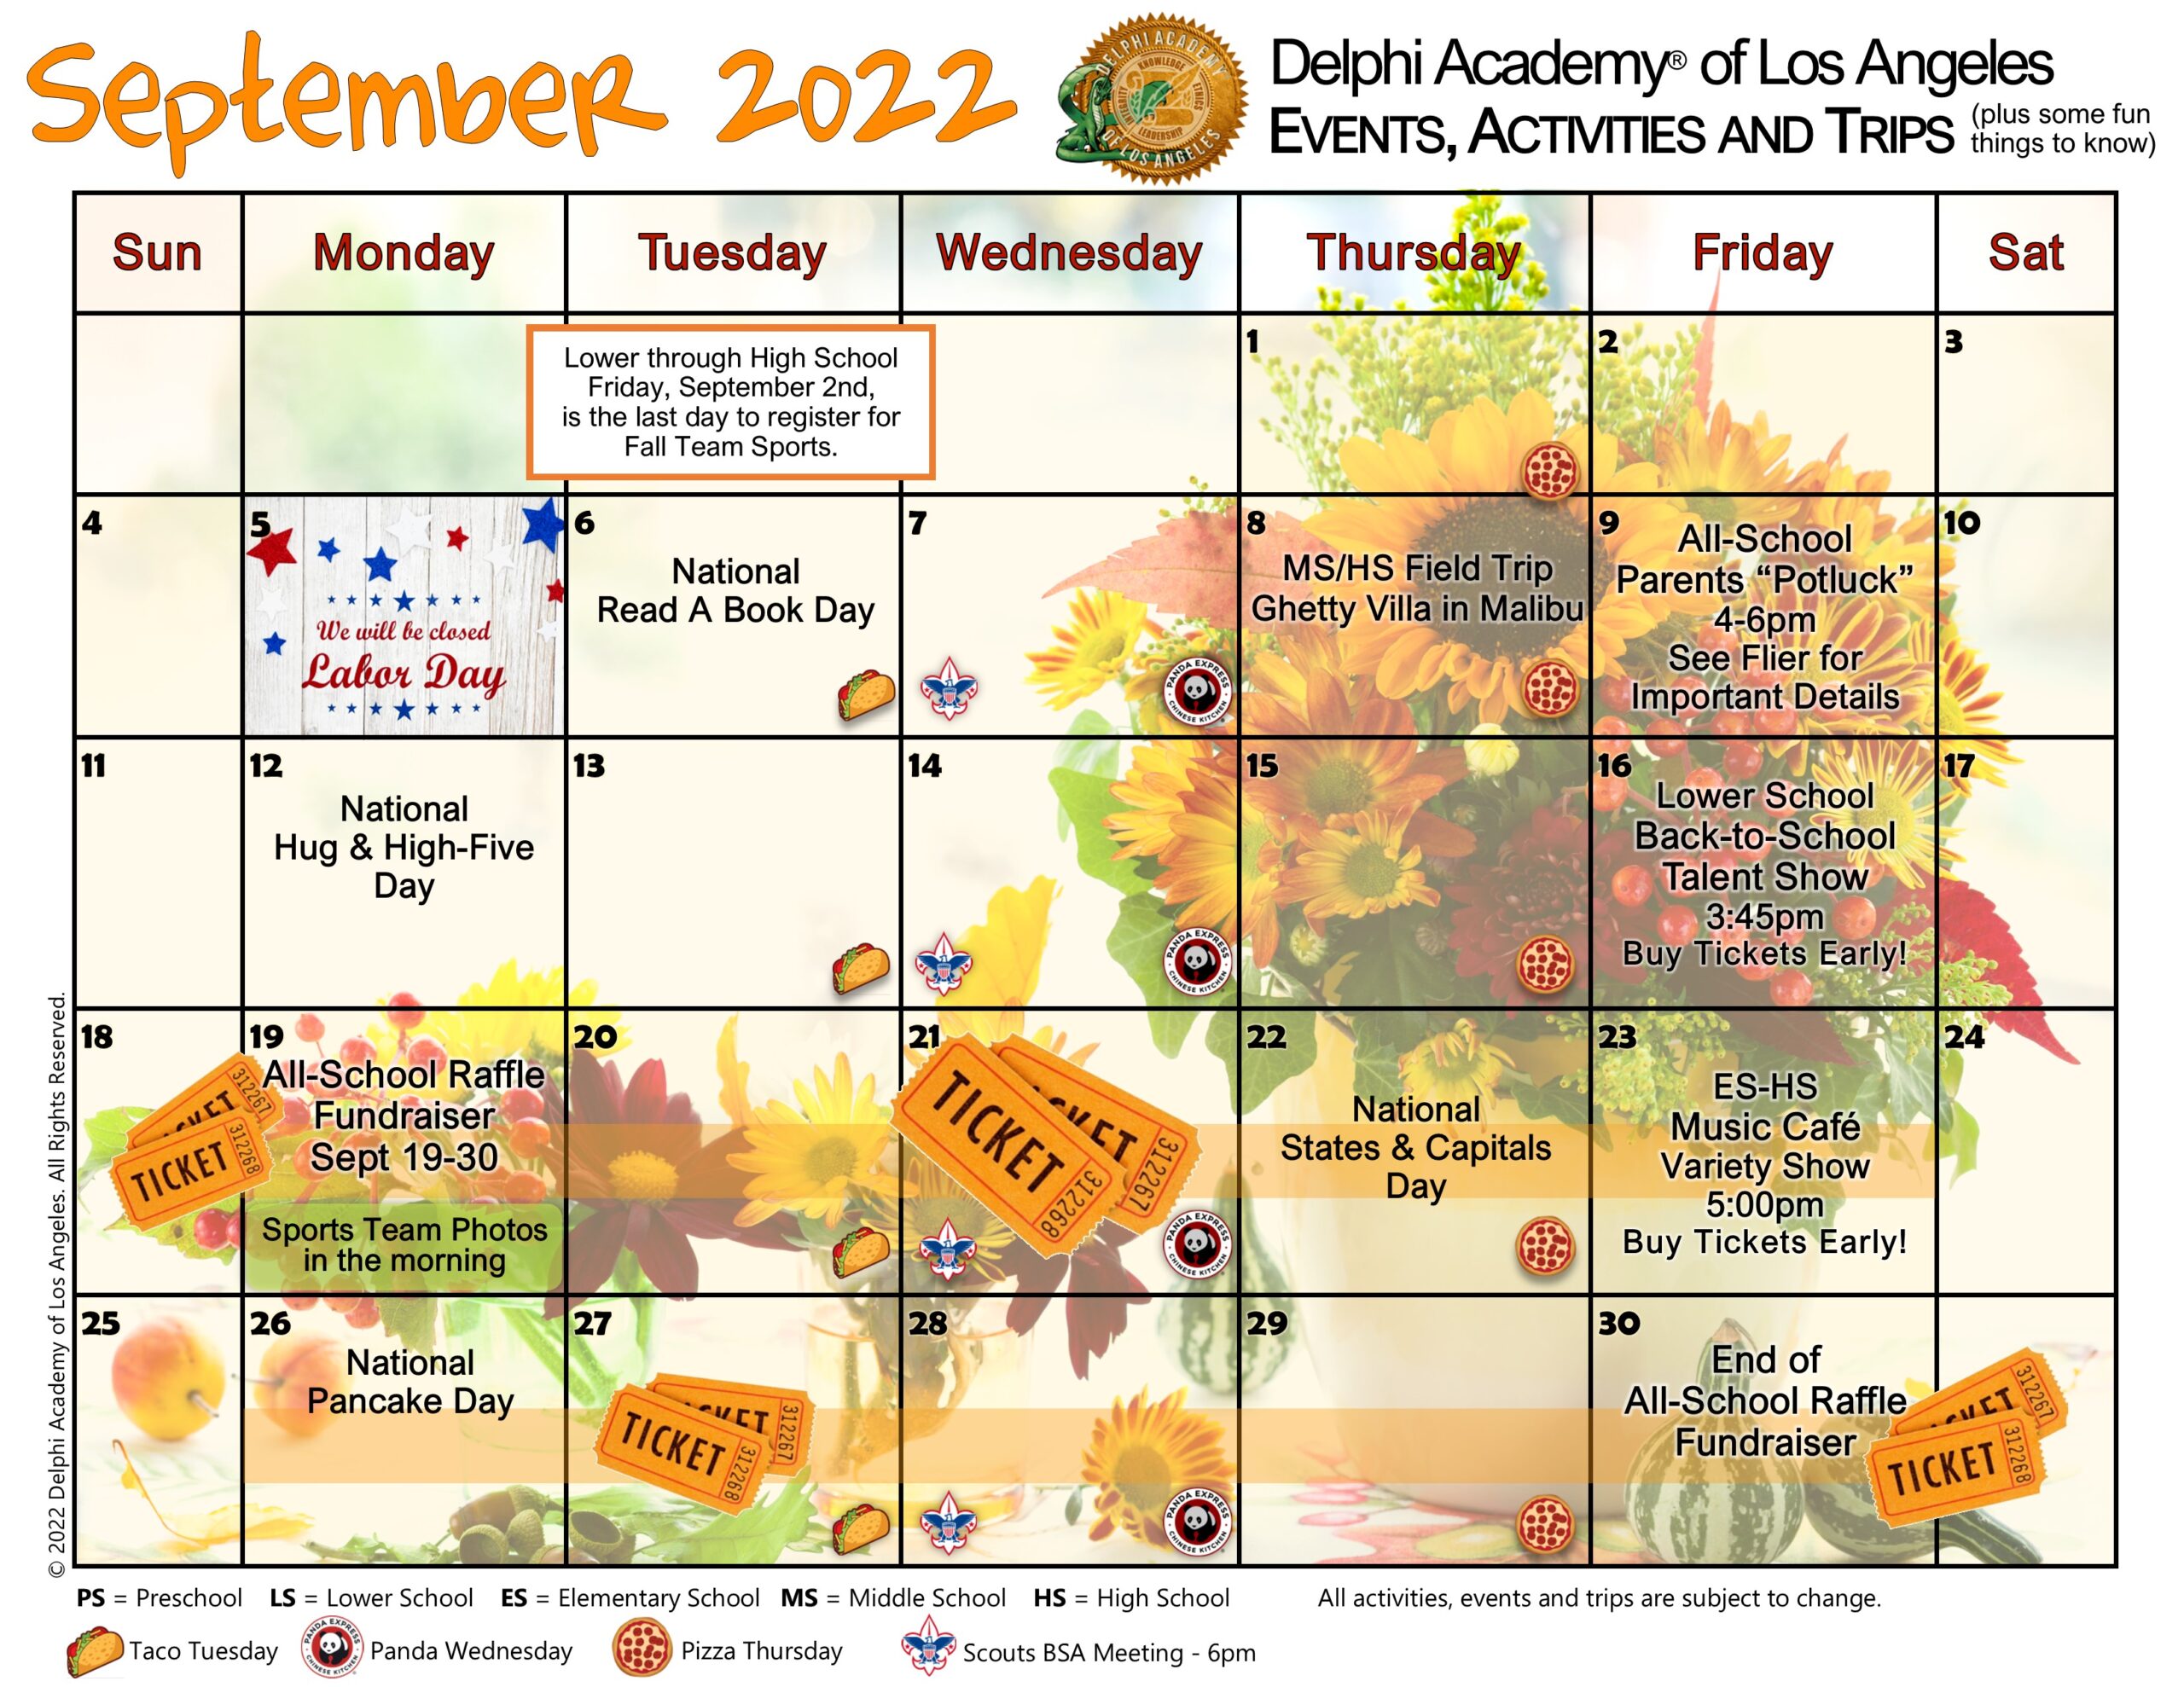 calendar-delphi-academy-of-los-angeles-educate-your-child-today